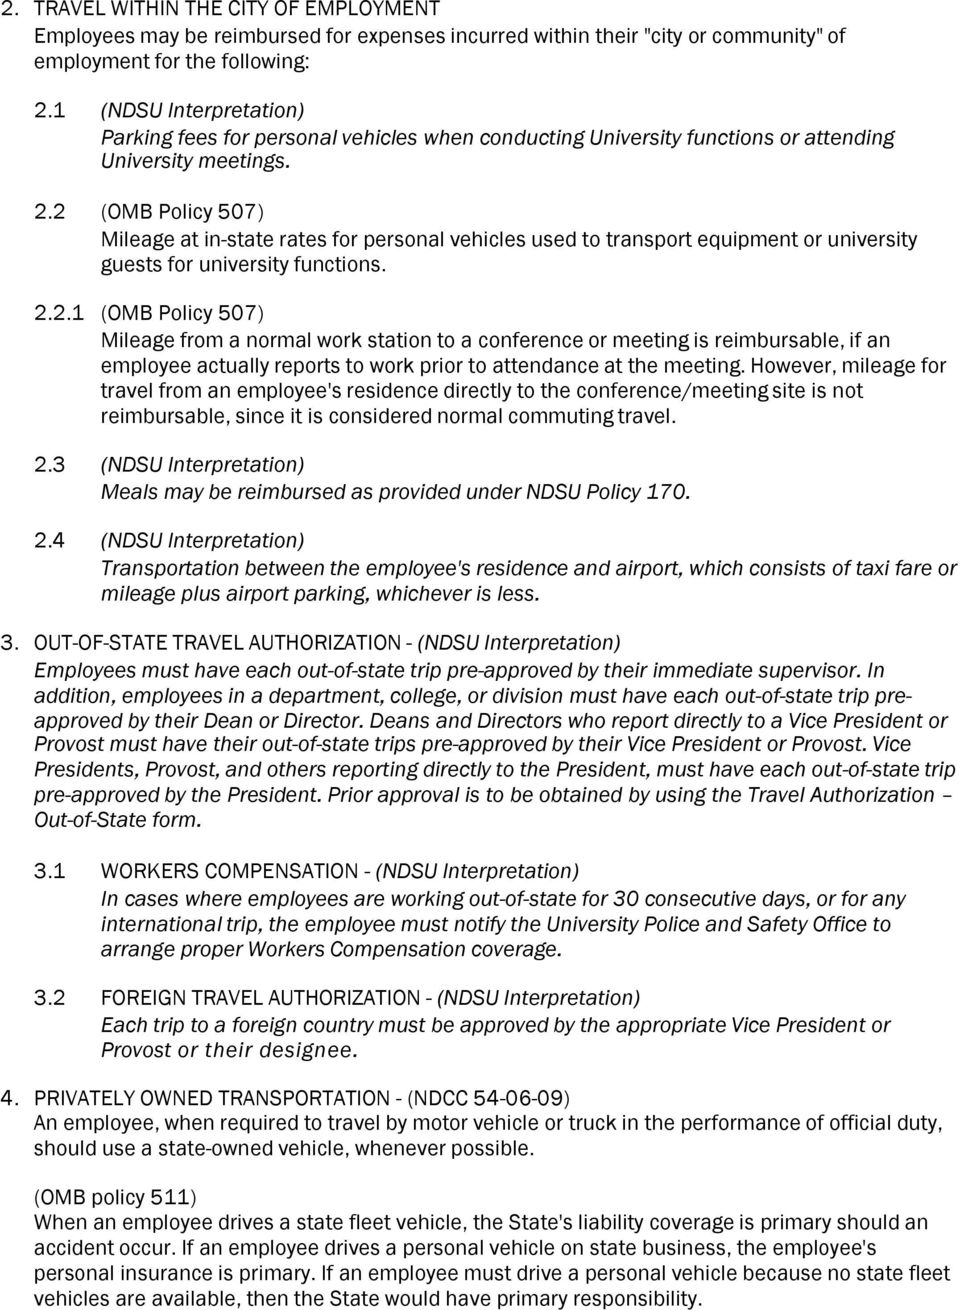 2 (OMB Policy 507) Mileage at in-state rates for personal vehicles used to transport equipment or university guests for university functions. 2.2.1 (OMB Policy 507) Mileage from a normal work station to a conference or meeting is reimbursable, if an employee actually reports to work prior to attendance at the meeting.